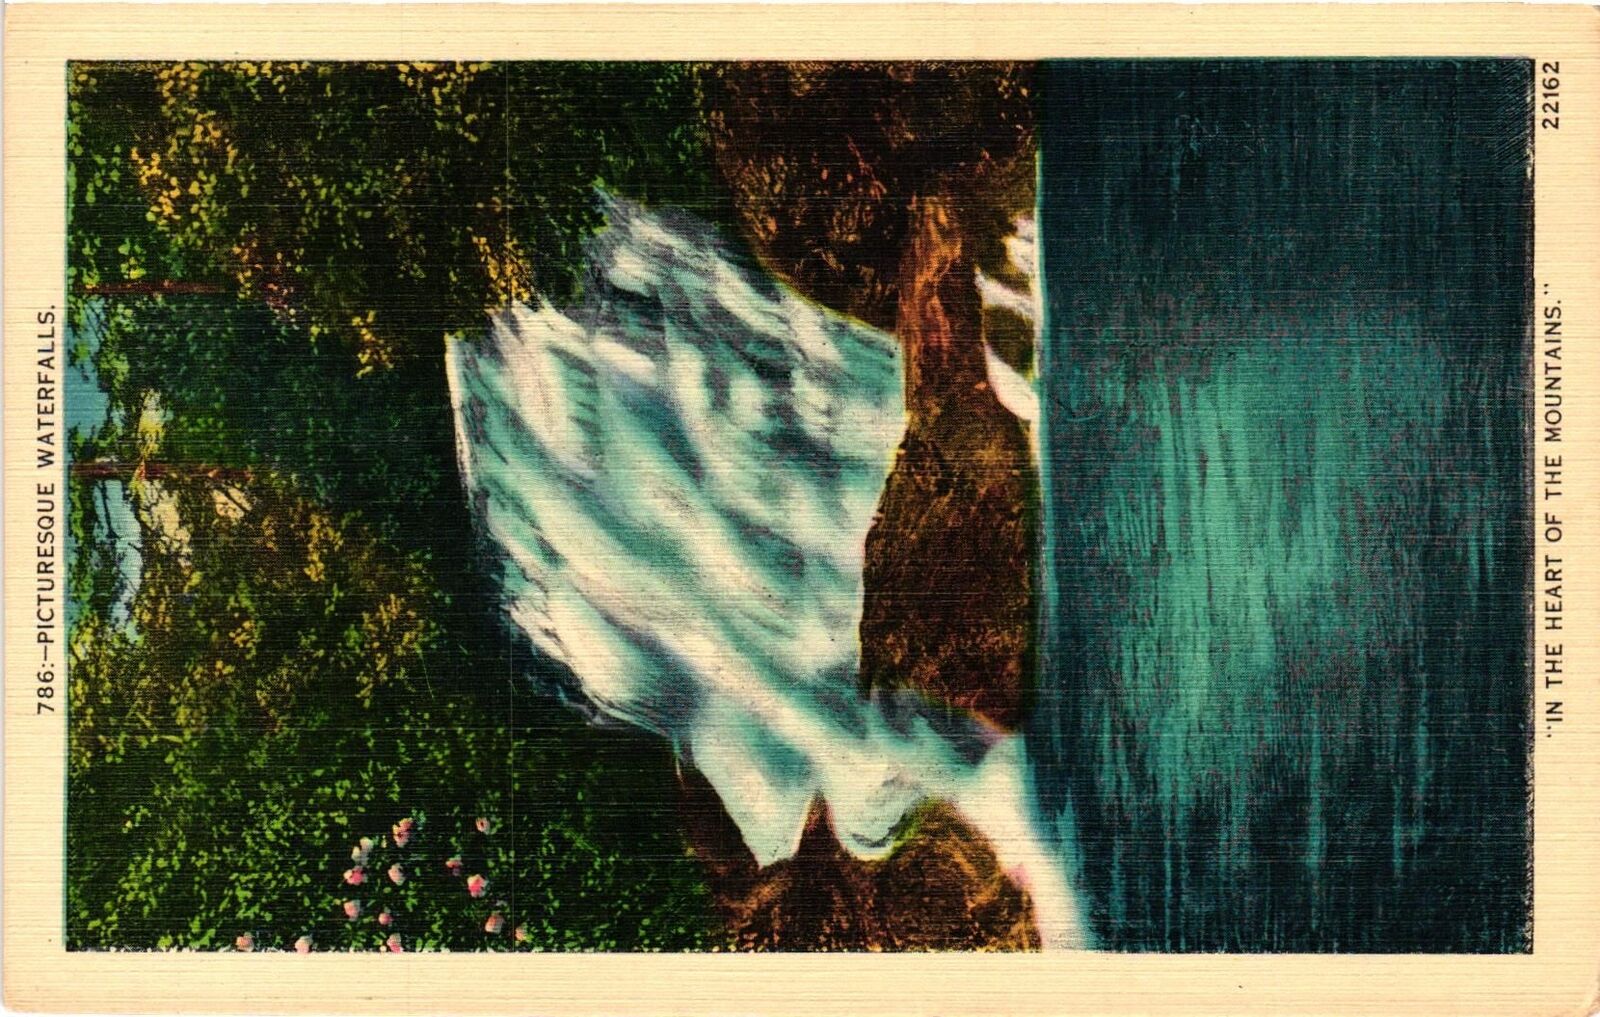 Vintage Postcard- Picturesque Waterfalls. Early 1900s